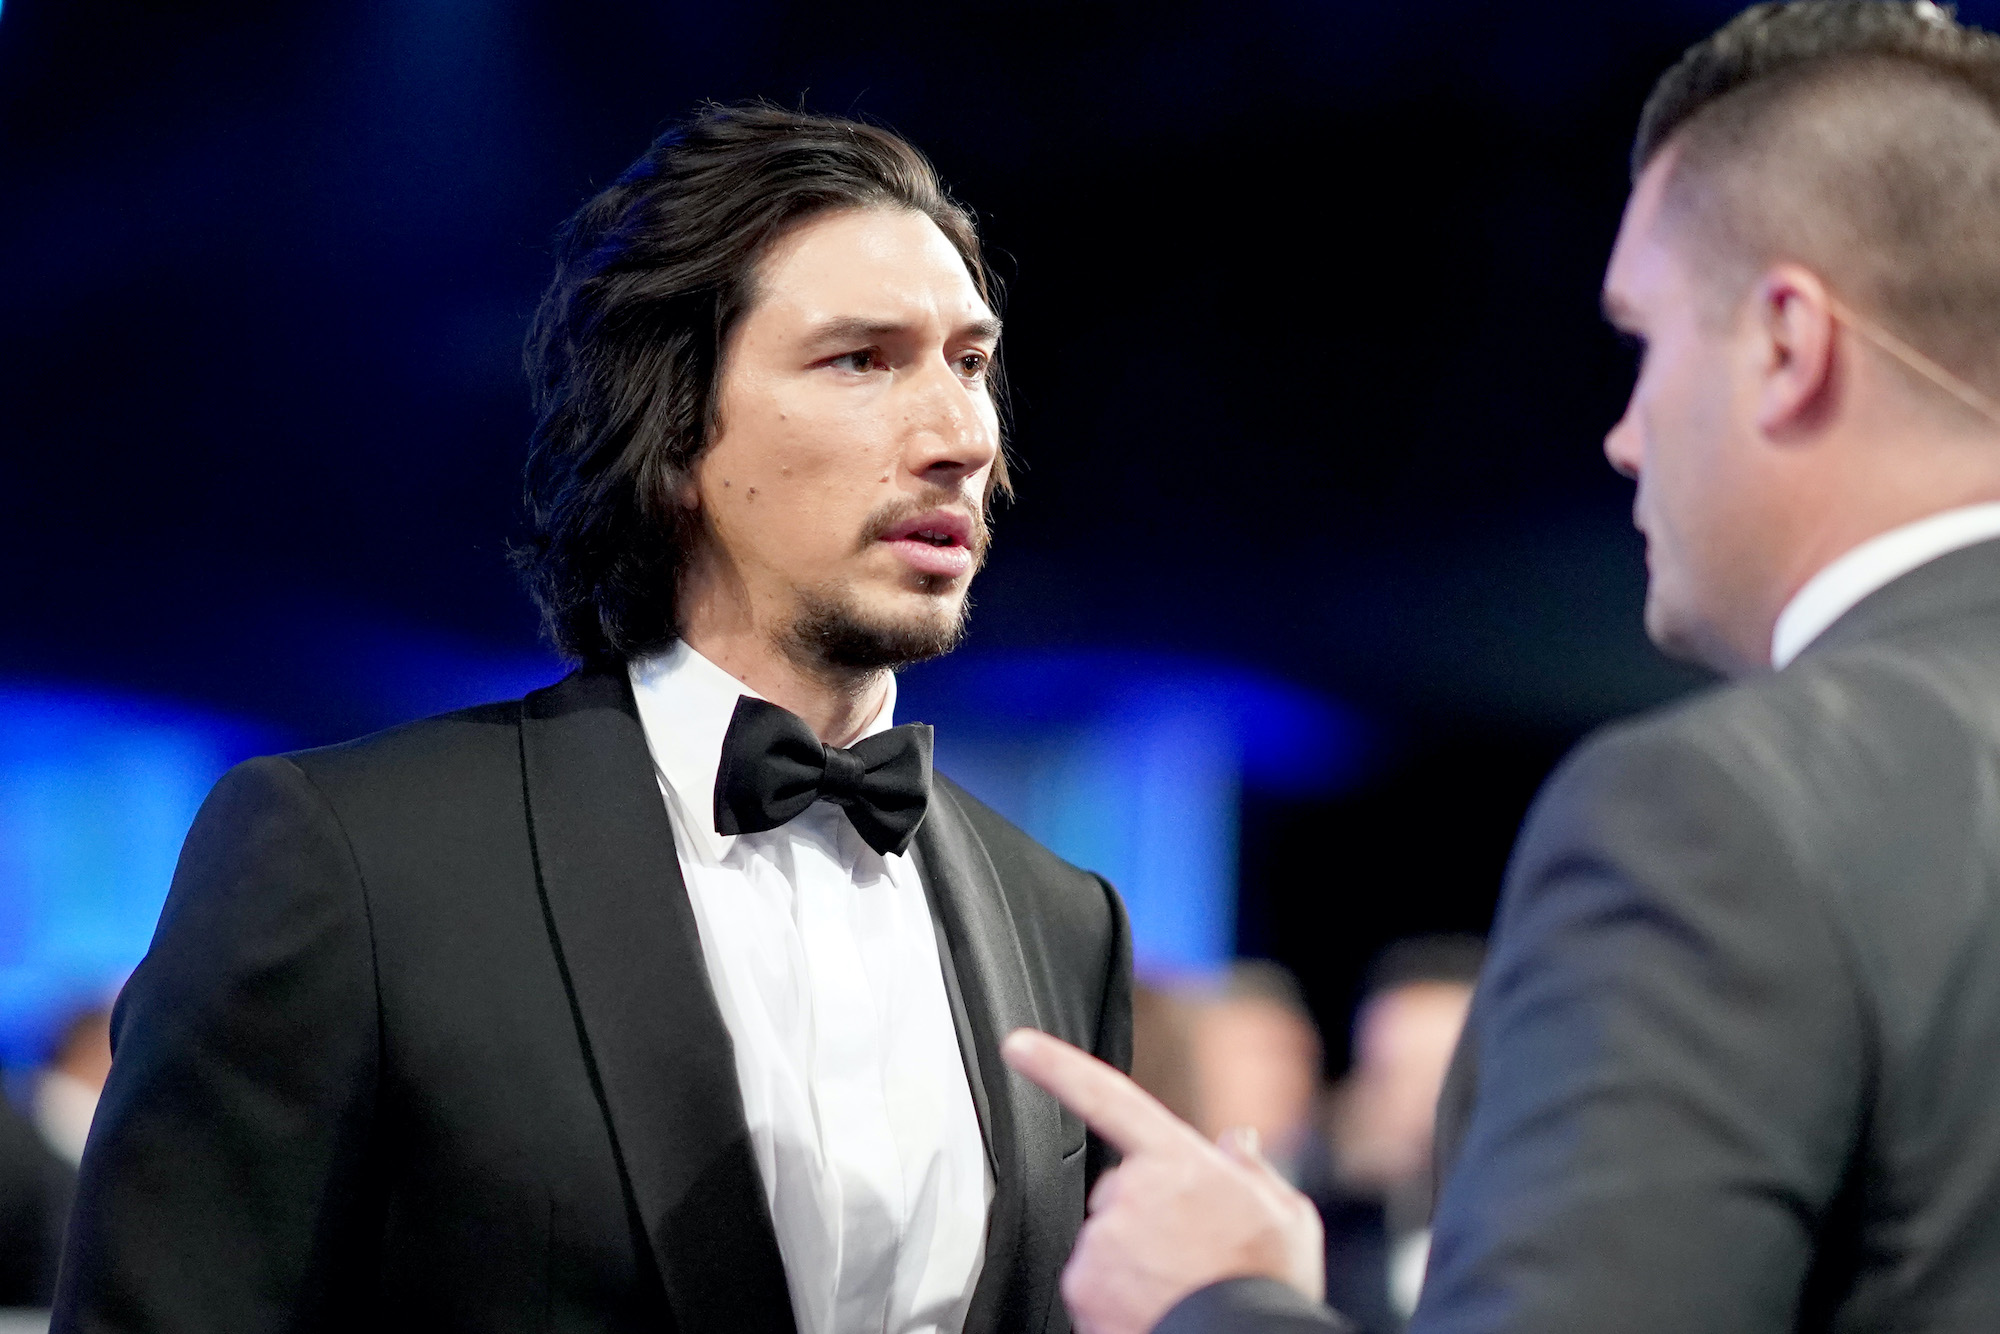 The Rise of Skywalker': Adam Driver as Ben Solo 'Elevated the Entire Movie